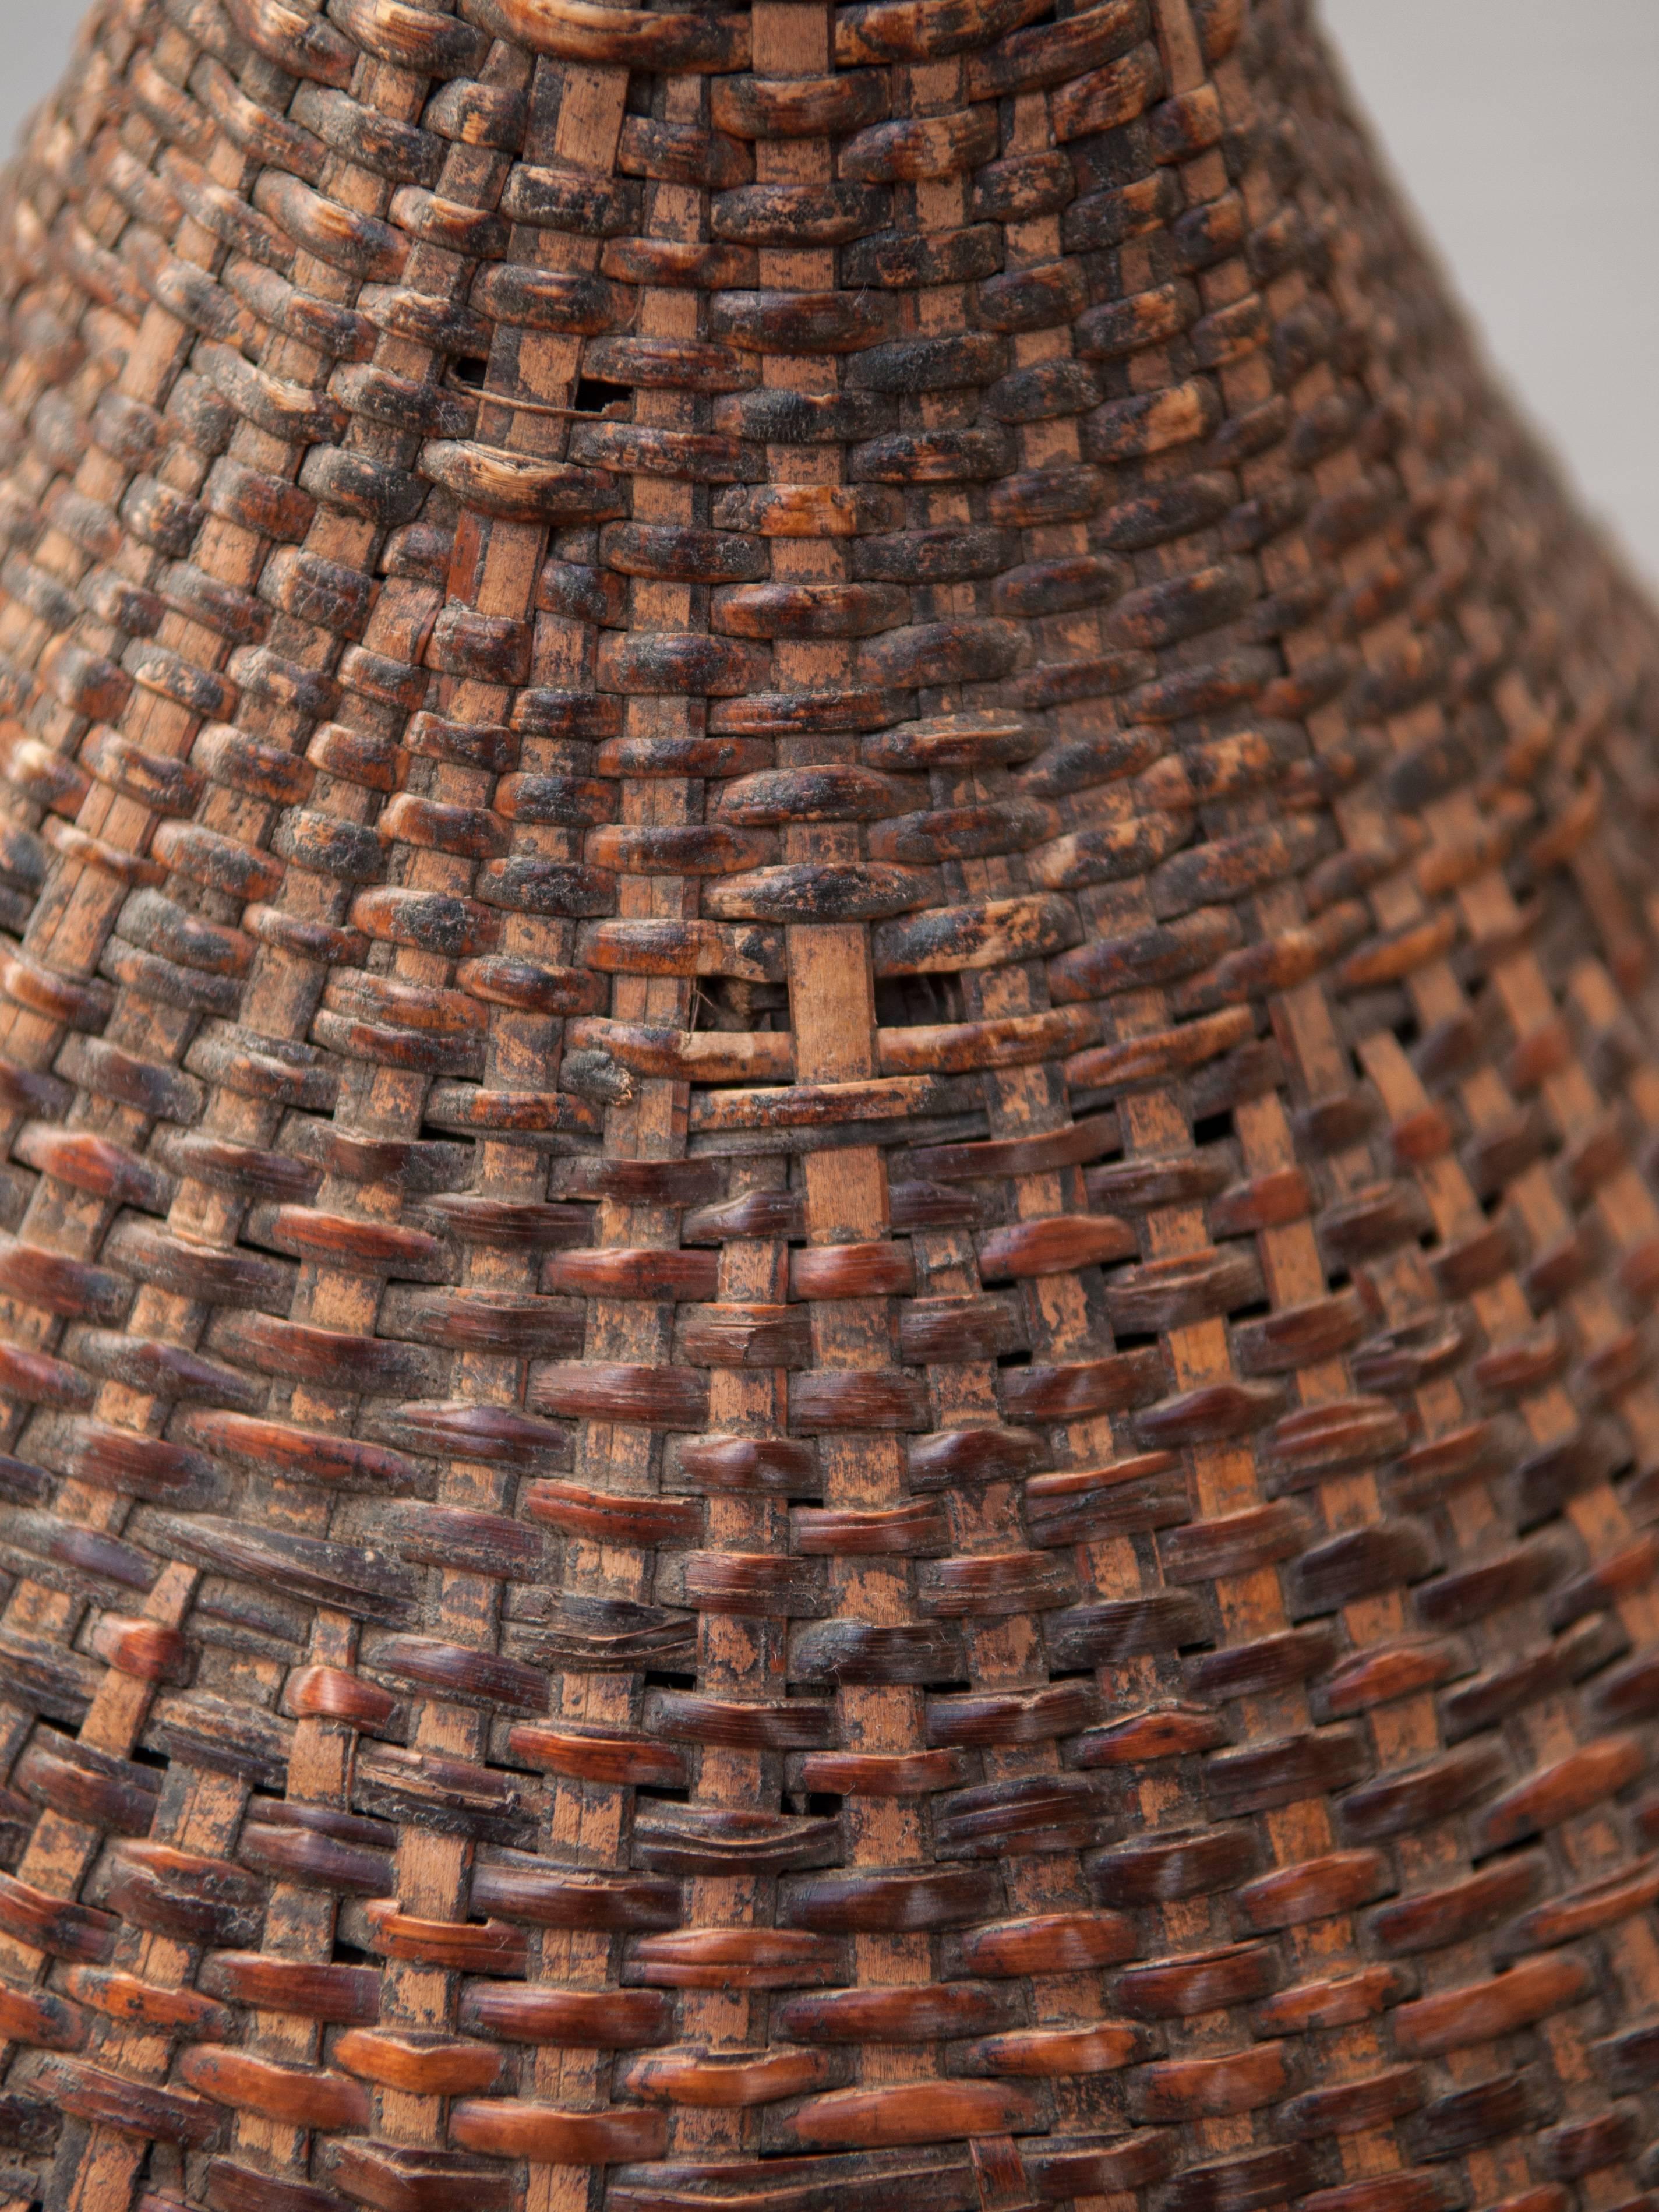 Hand-Crafted Lidded Handwoven Storage Basket, Chin People of Burma, Mid-20th Century, Bamboo